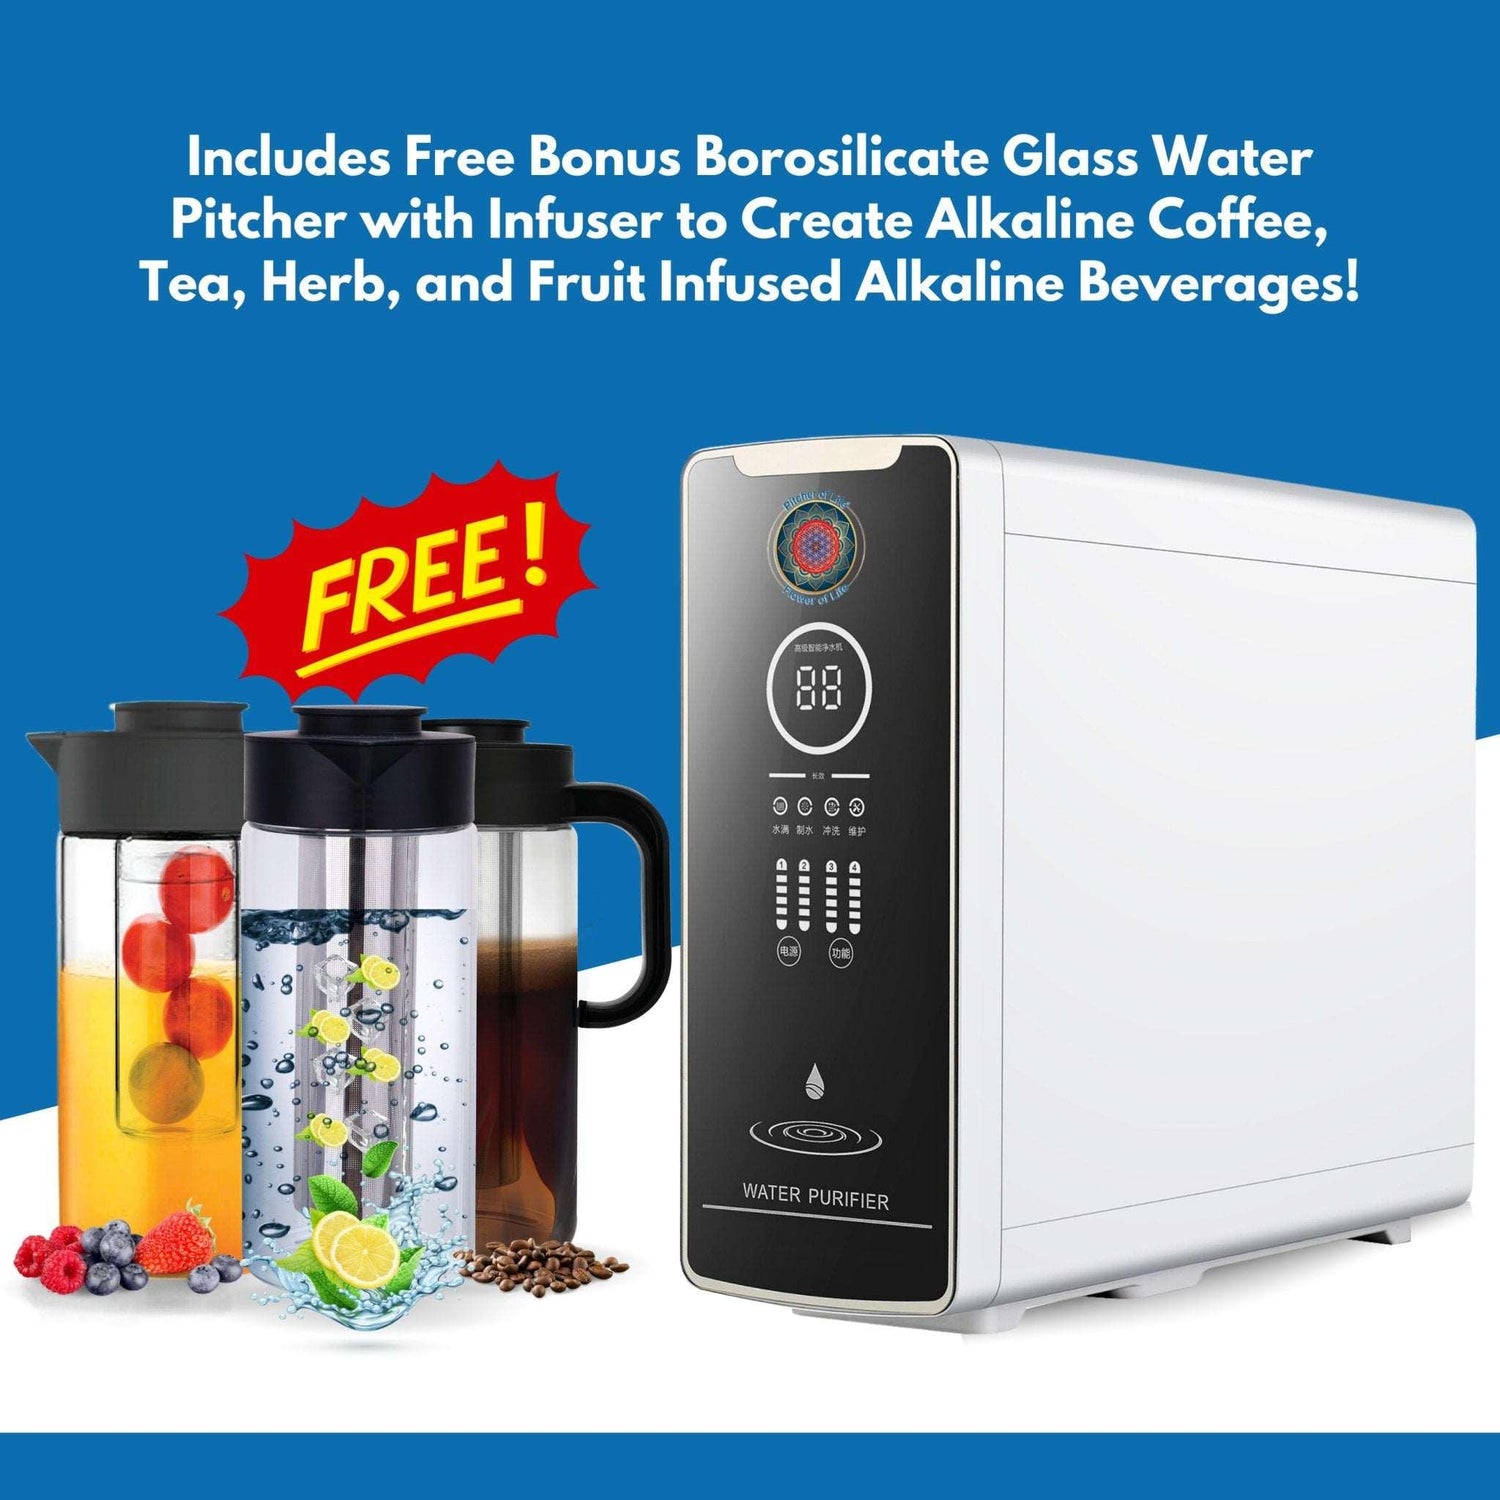 Life Sciences™ Reverse Osmosis Alkaline Water Purifying Generator - New Tankless Technology. Include Free Bonus Life Borosilicate Glass Water Pitcher with Infuser